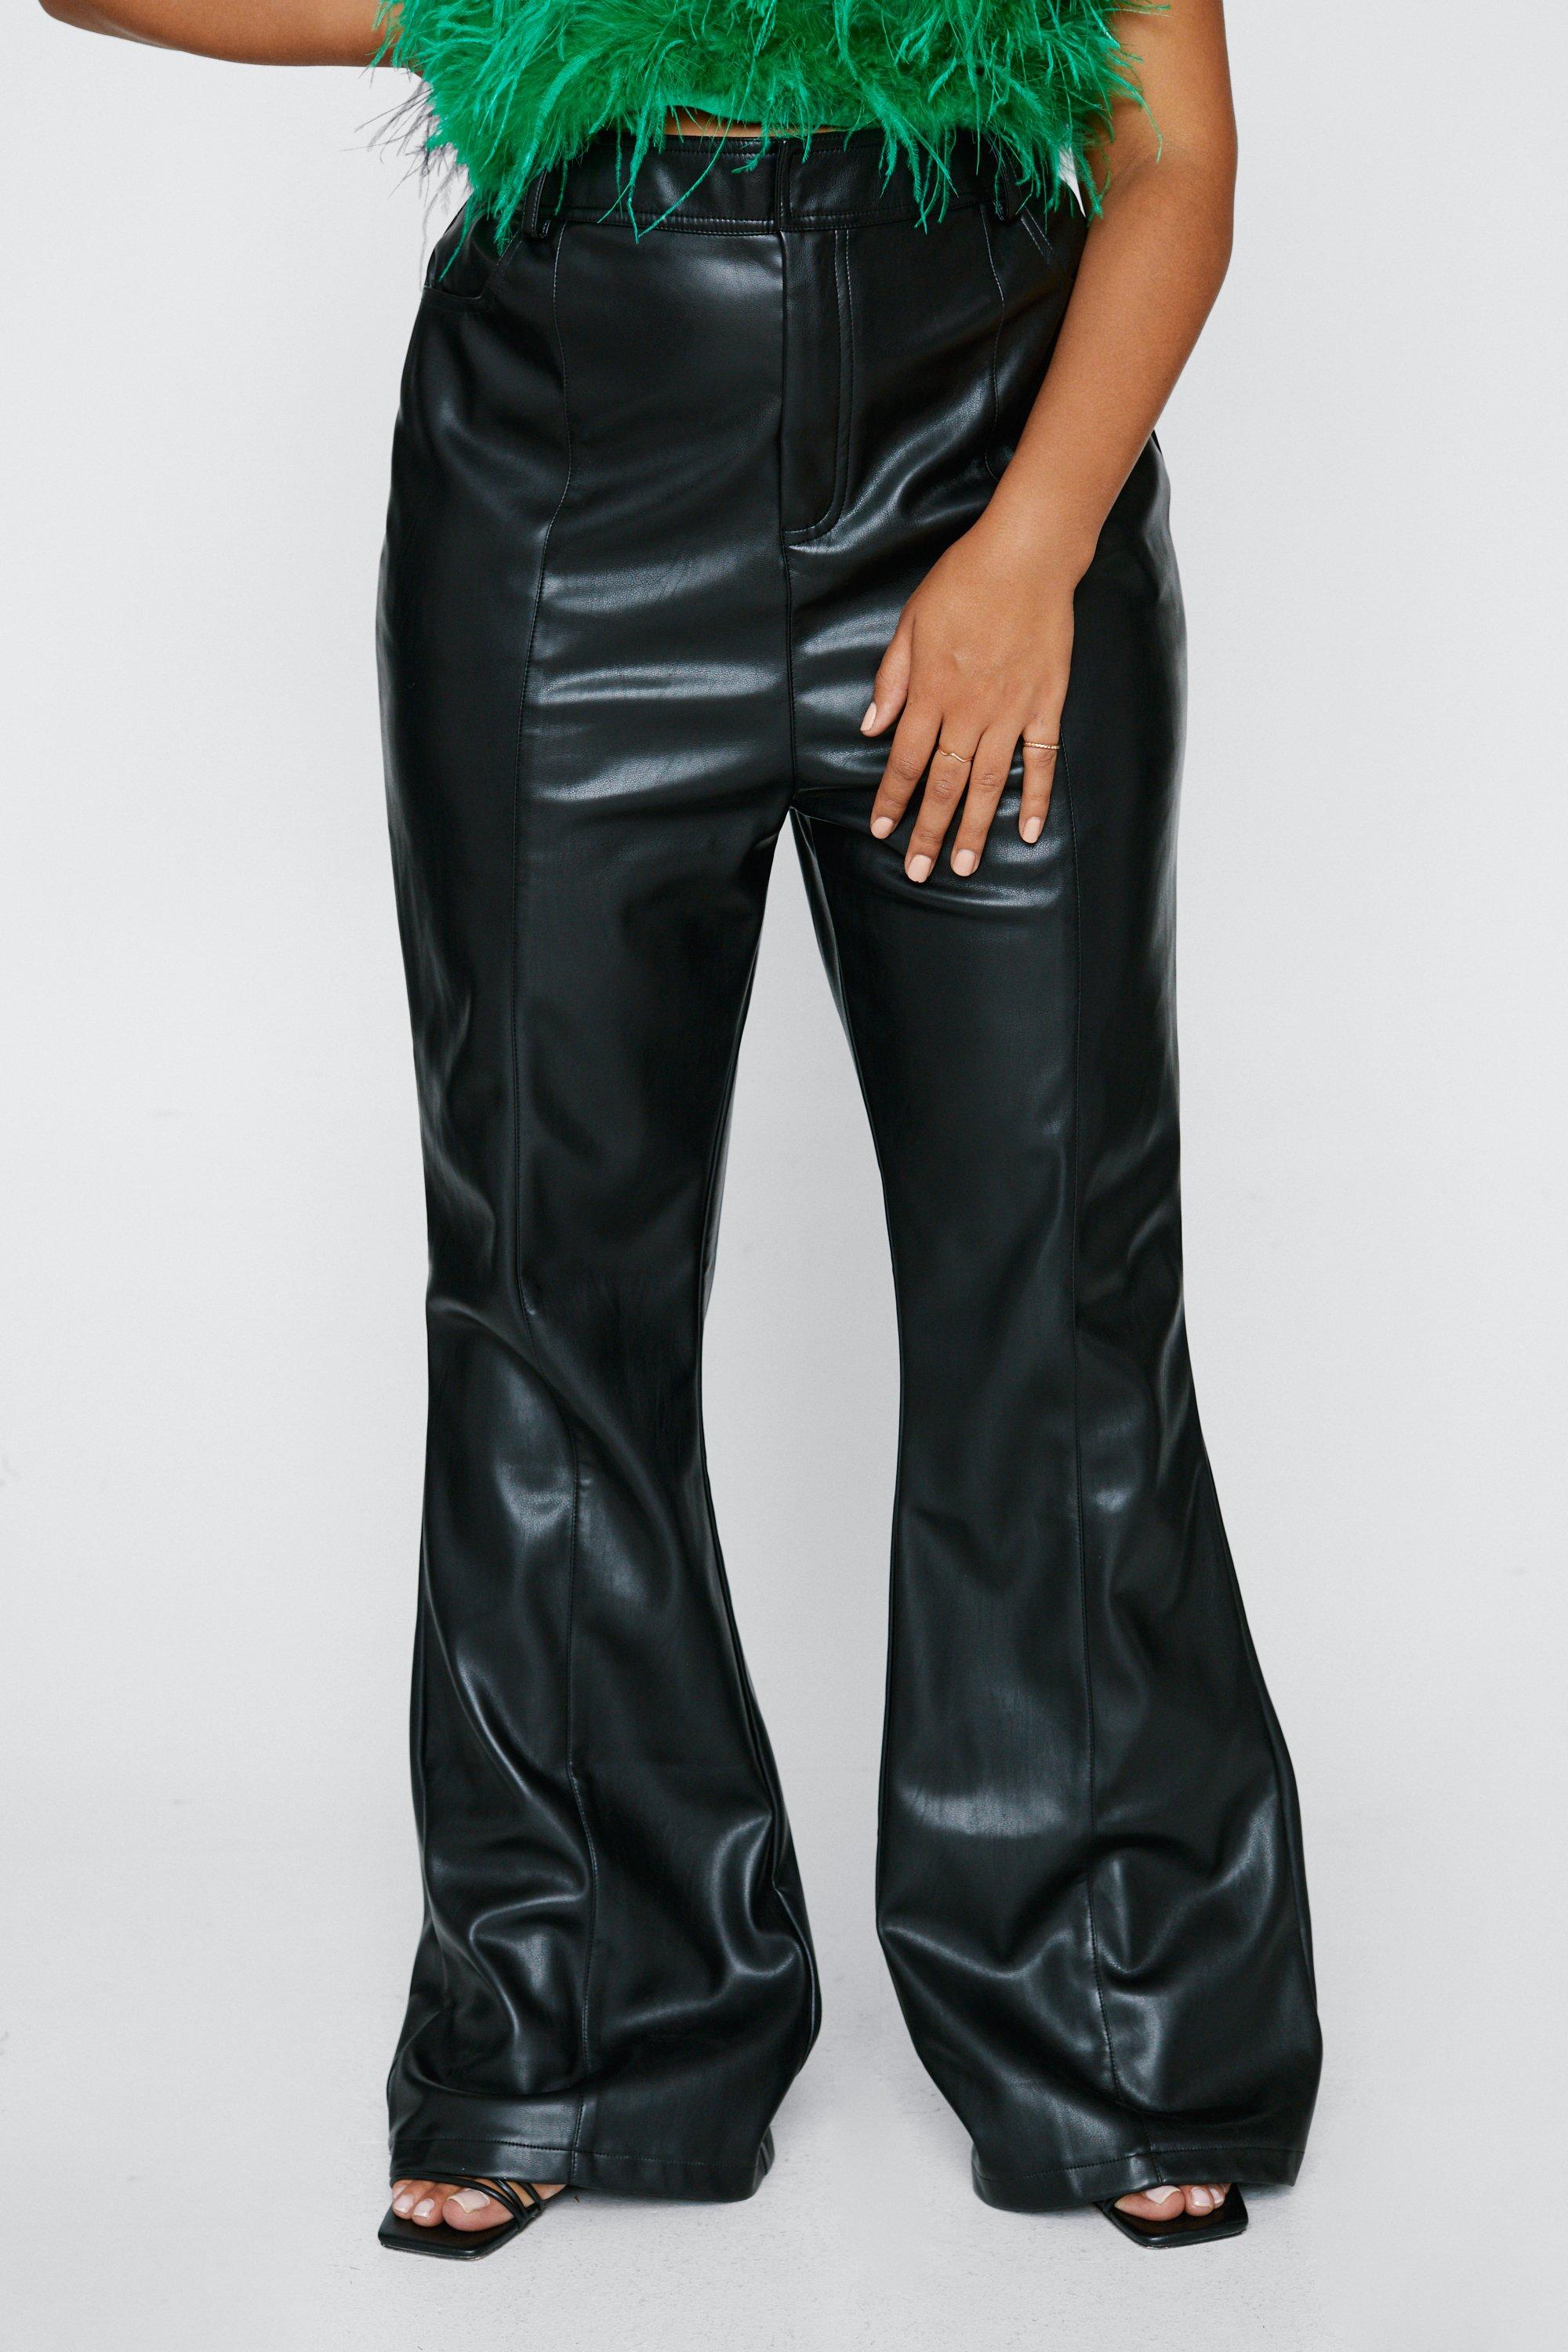 Missguided Plus Size Black Premium Faux Leather Pants  Plus size leather  pants, Plus size outfits, Leather pants outfit night